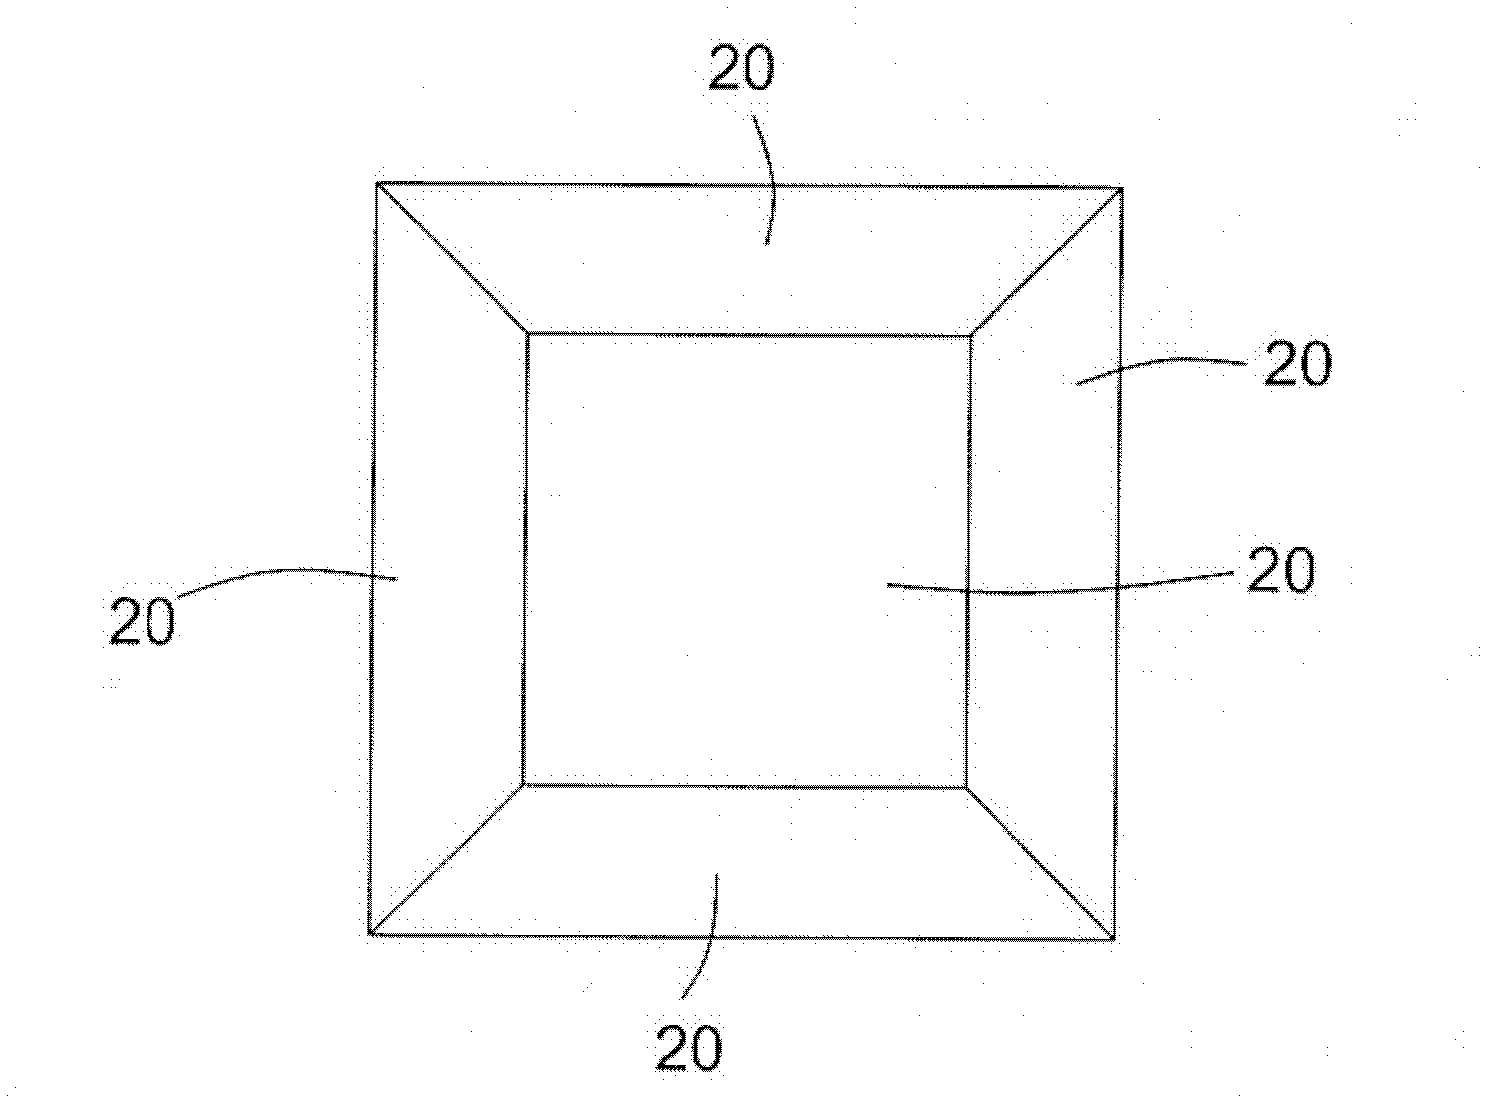 Method for recycling and reusing stone slab waste